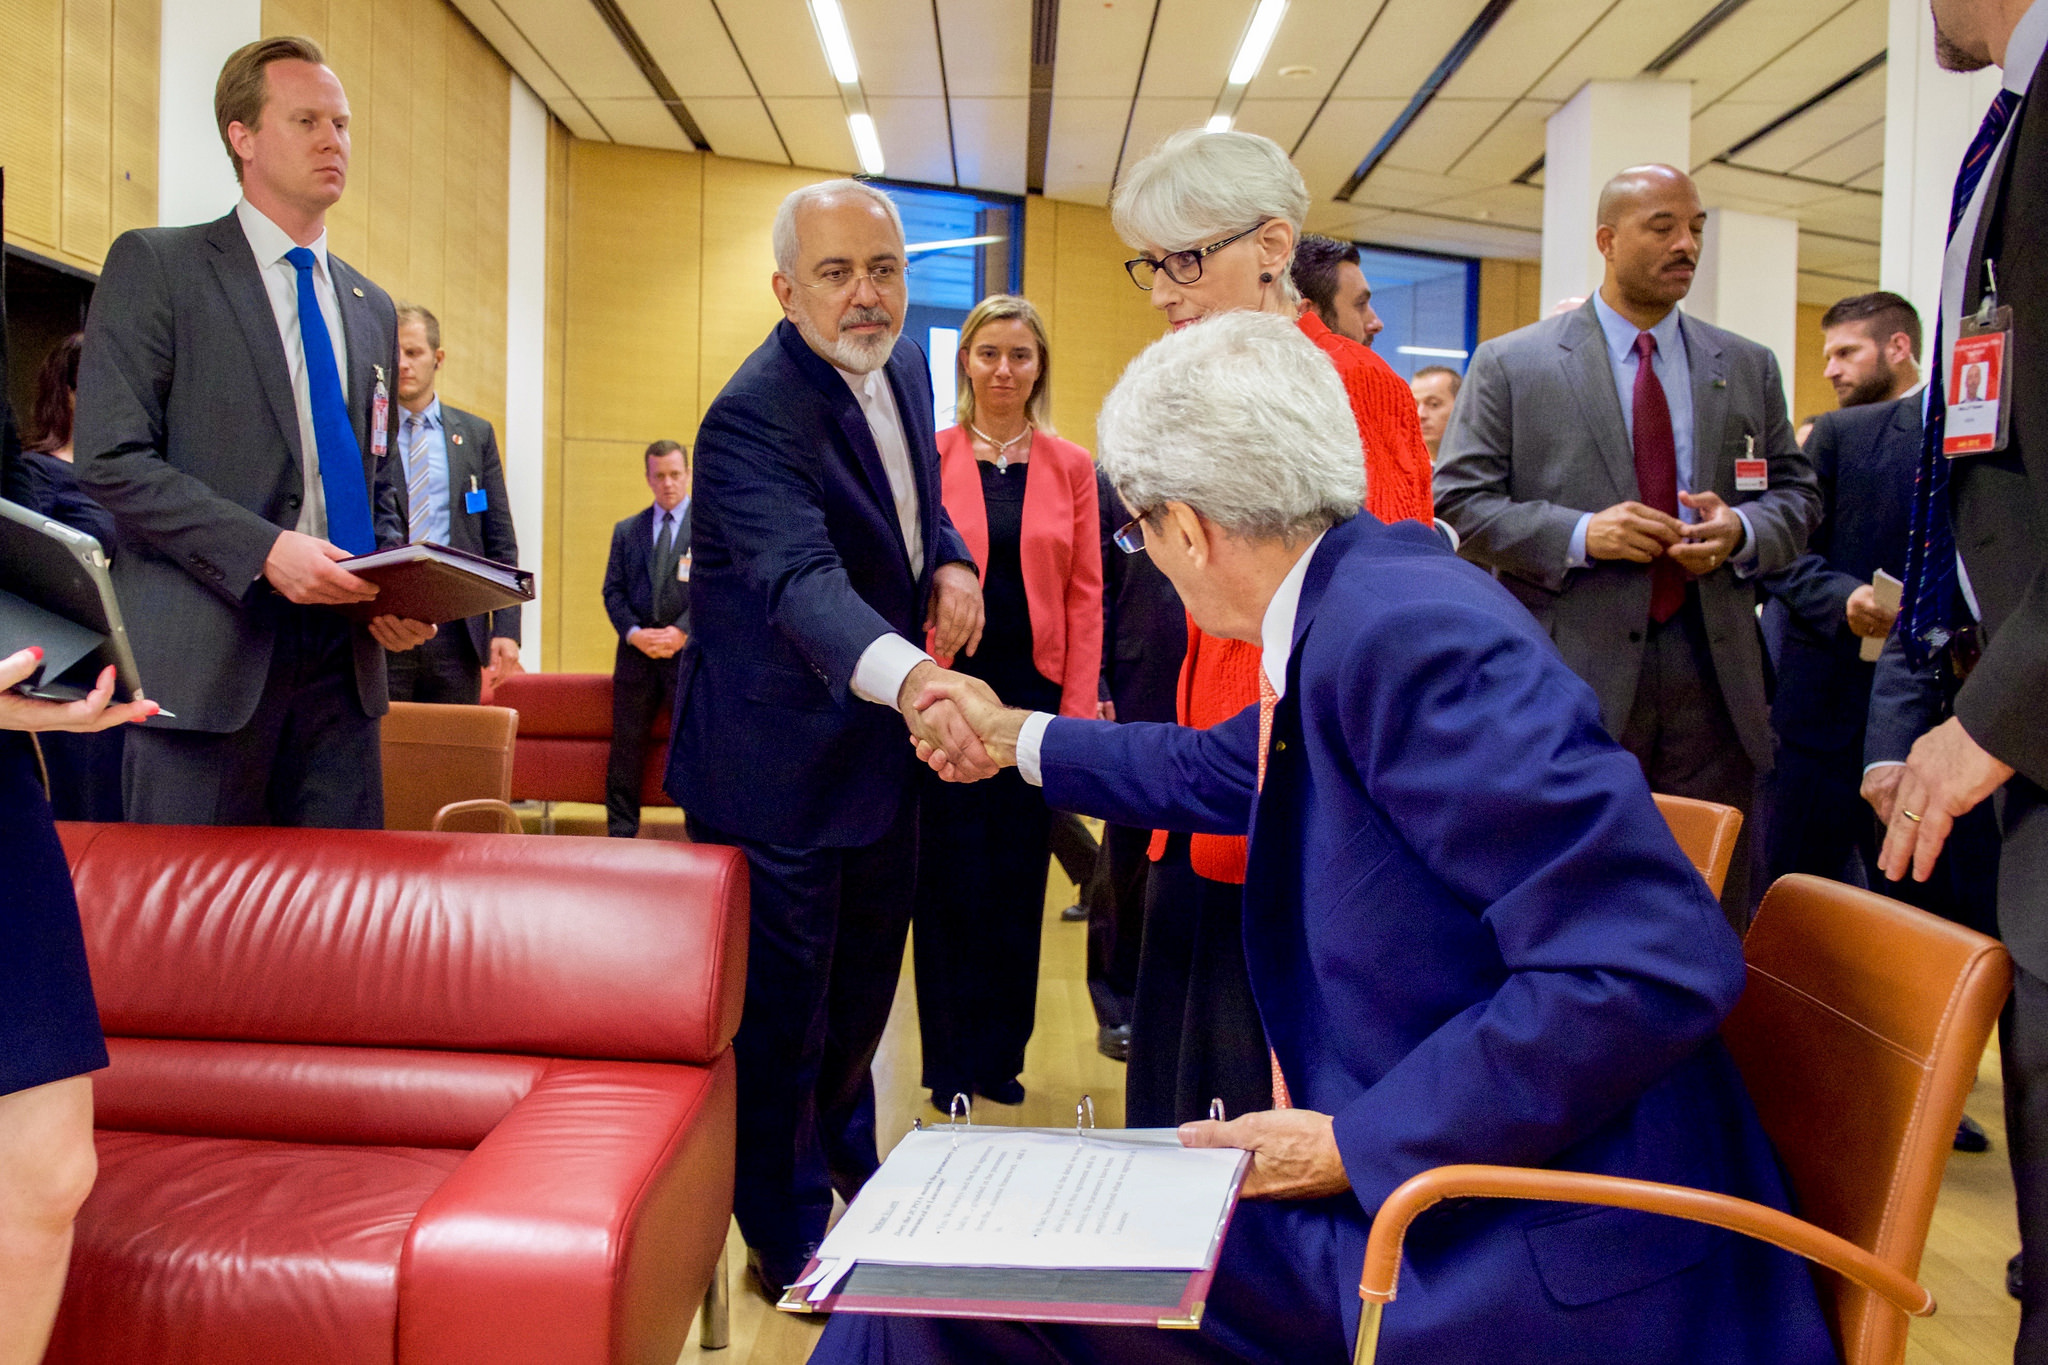 Secretary Kerry shakes hands with and bids goodbye to Iranian Foreign Minister Zarif at the Austria Center in Vienna, July 14, 2015, after Zarif read a declaration of the nuclear agreement in his native Farsi. (State Department)